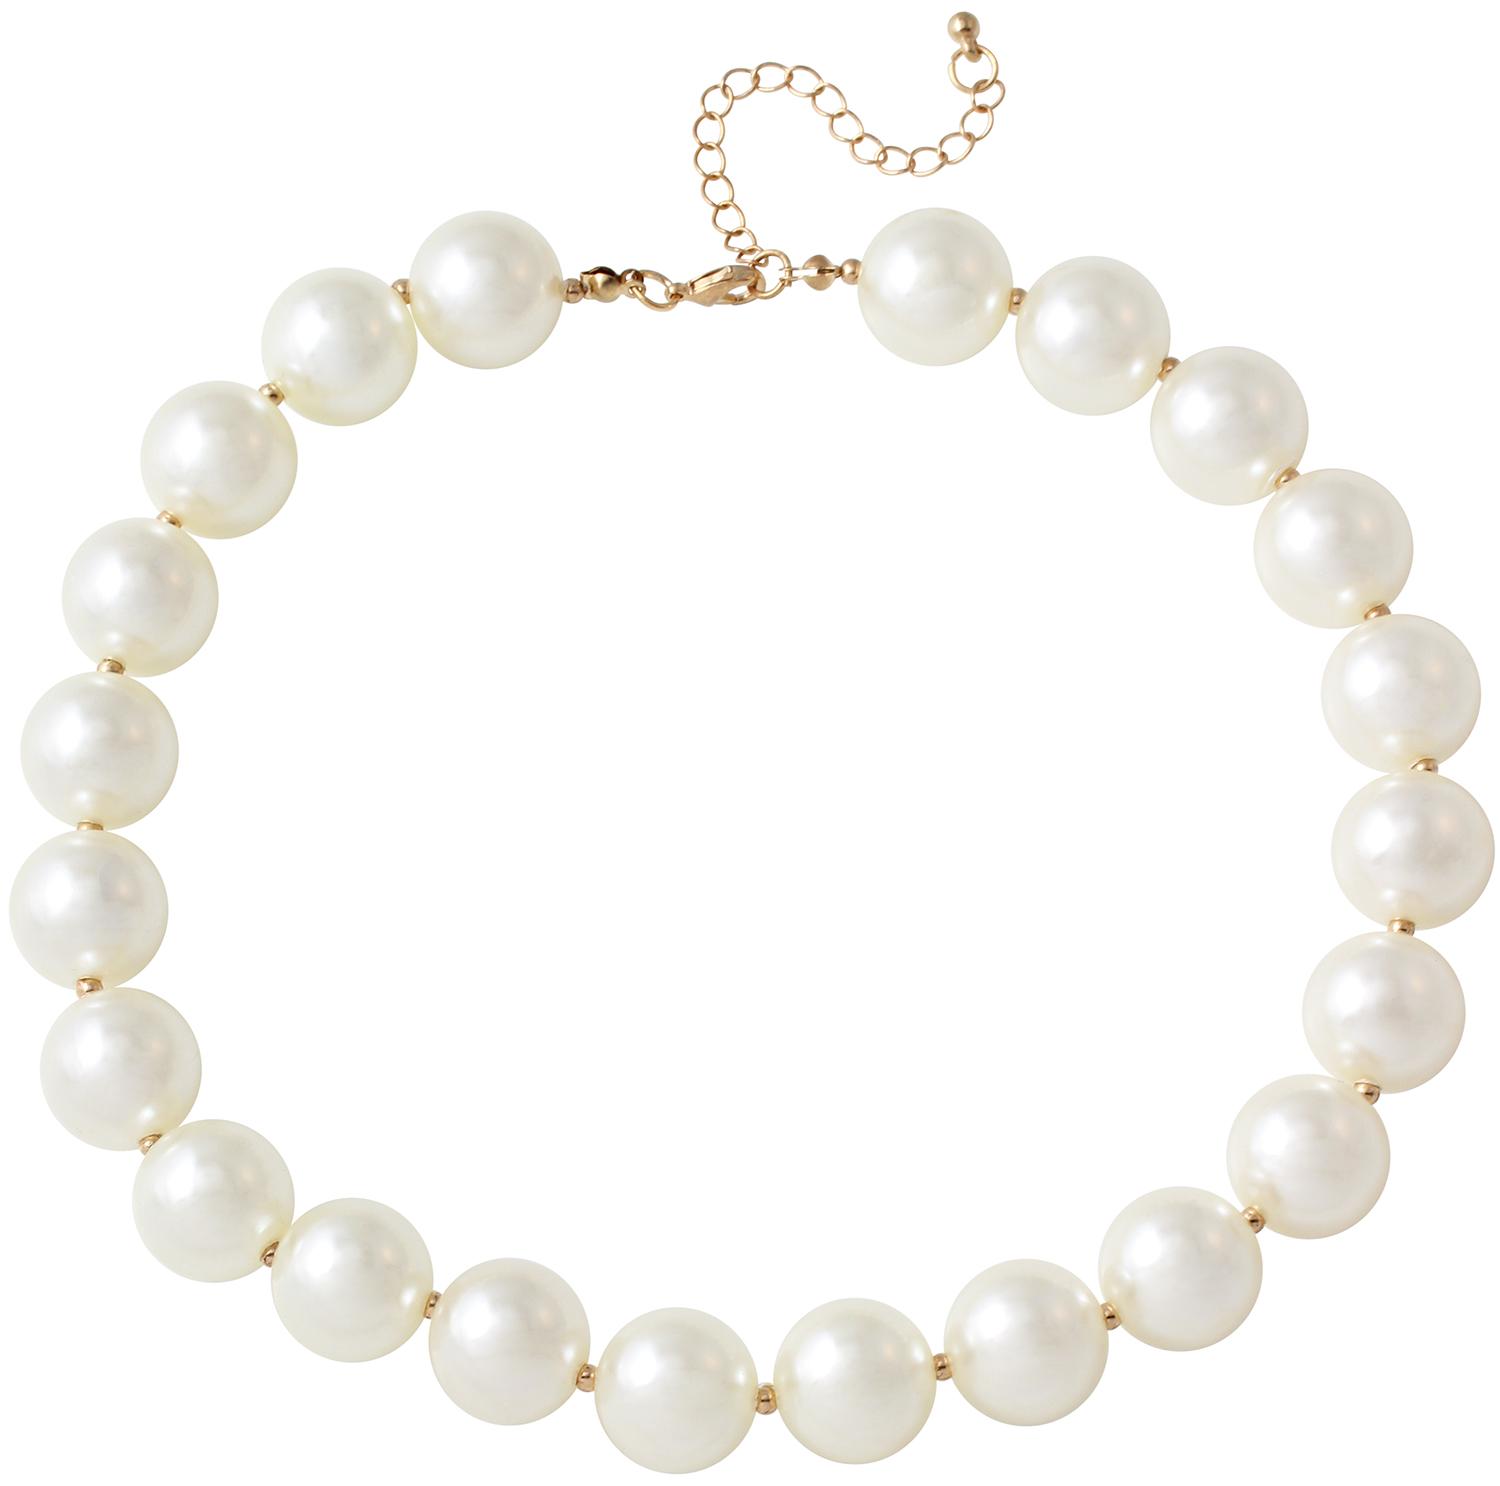 Necklace - Large pearl